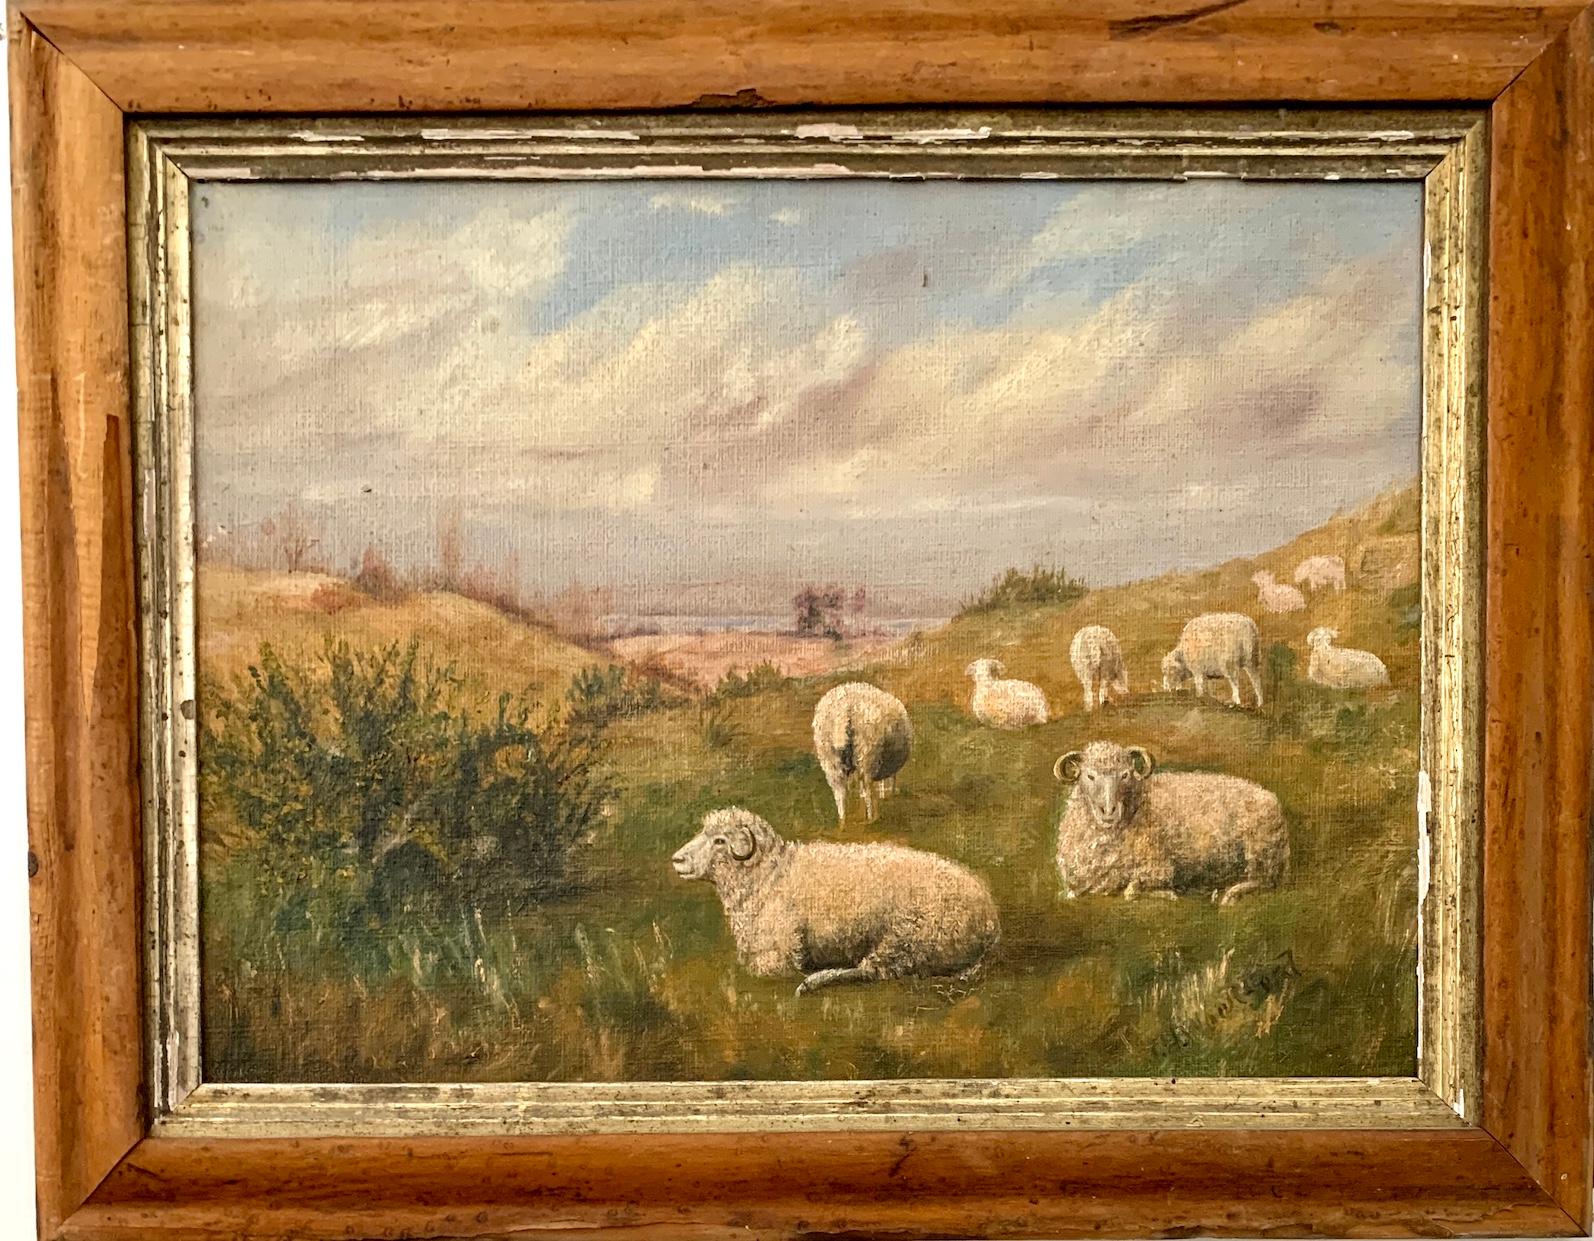 19th Century English folk art of Sheep in a landscape with maple frame